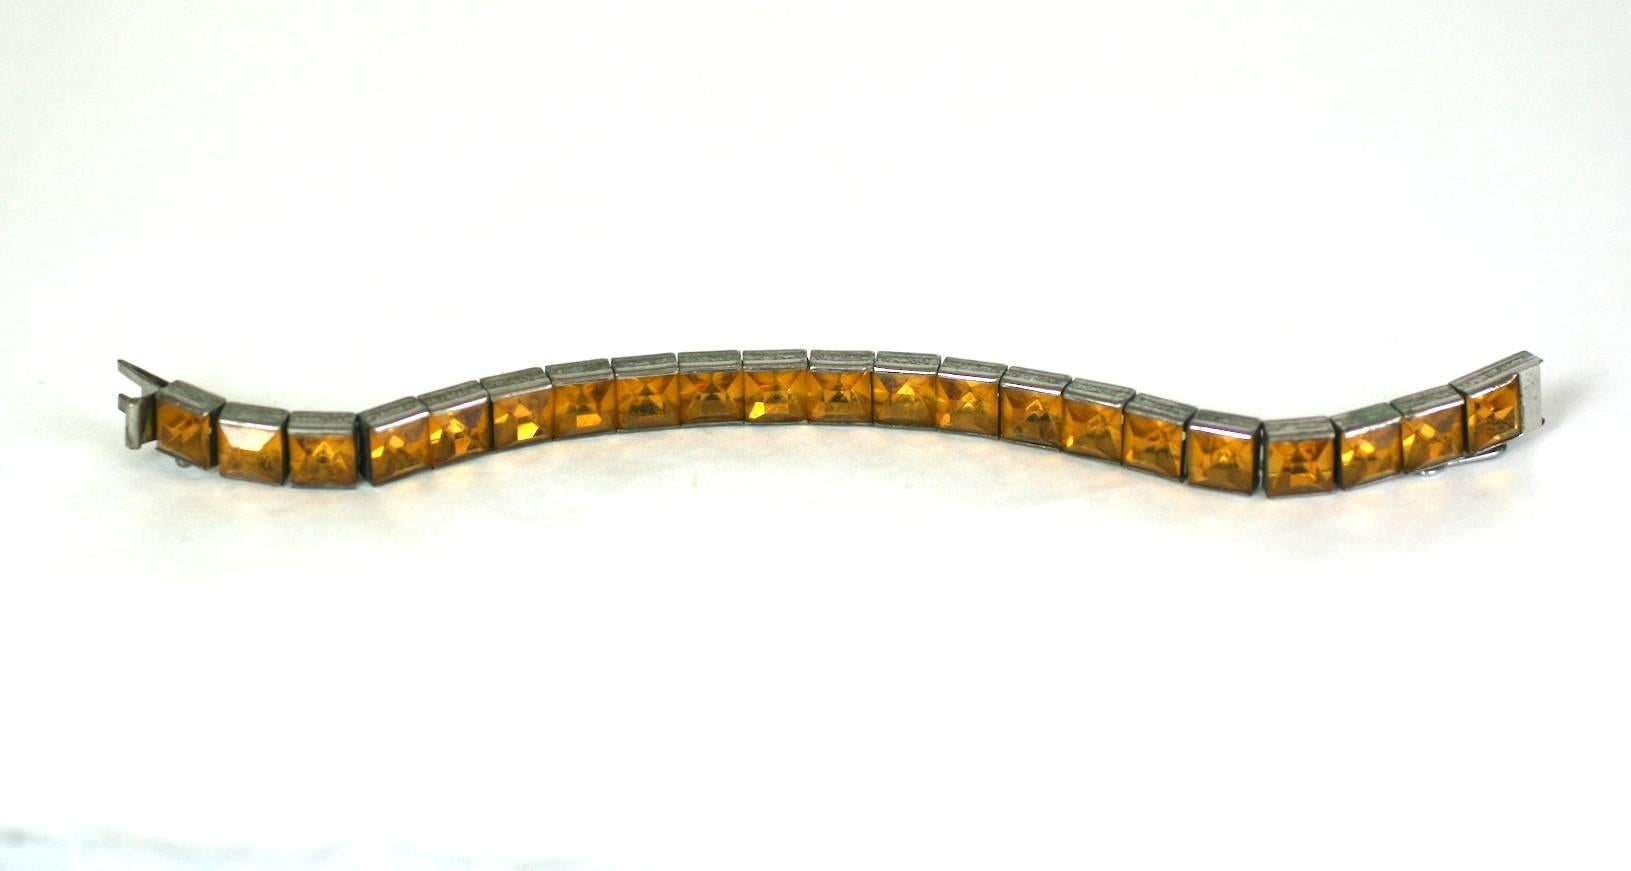 Art Deco Sterling Citrine Straight Line Bracelet from the 1930's. Square cut citrine pastes are set in sterling flexible settings in a tennis style bracelet. Lovely engraved designs on sides of links. 
Wonderfully supple craftmanship. 1920's